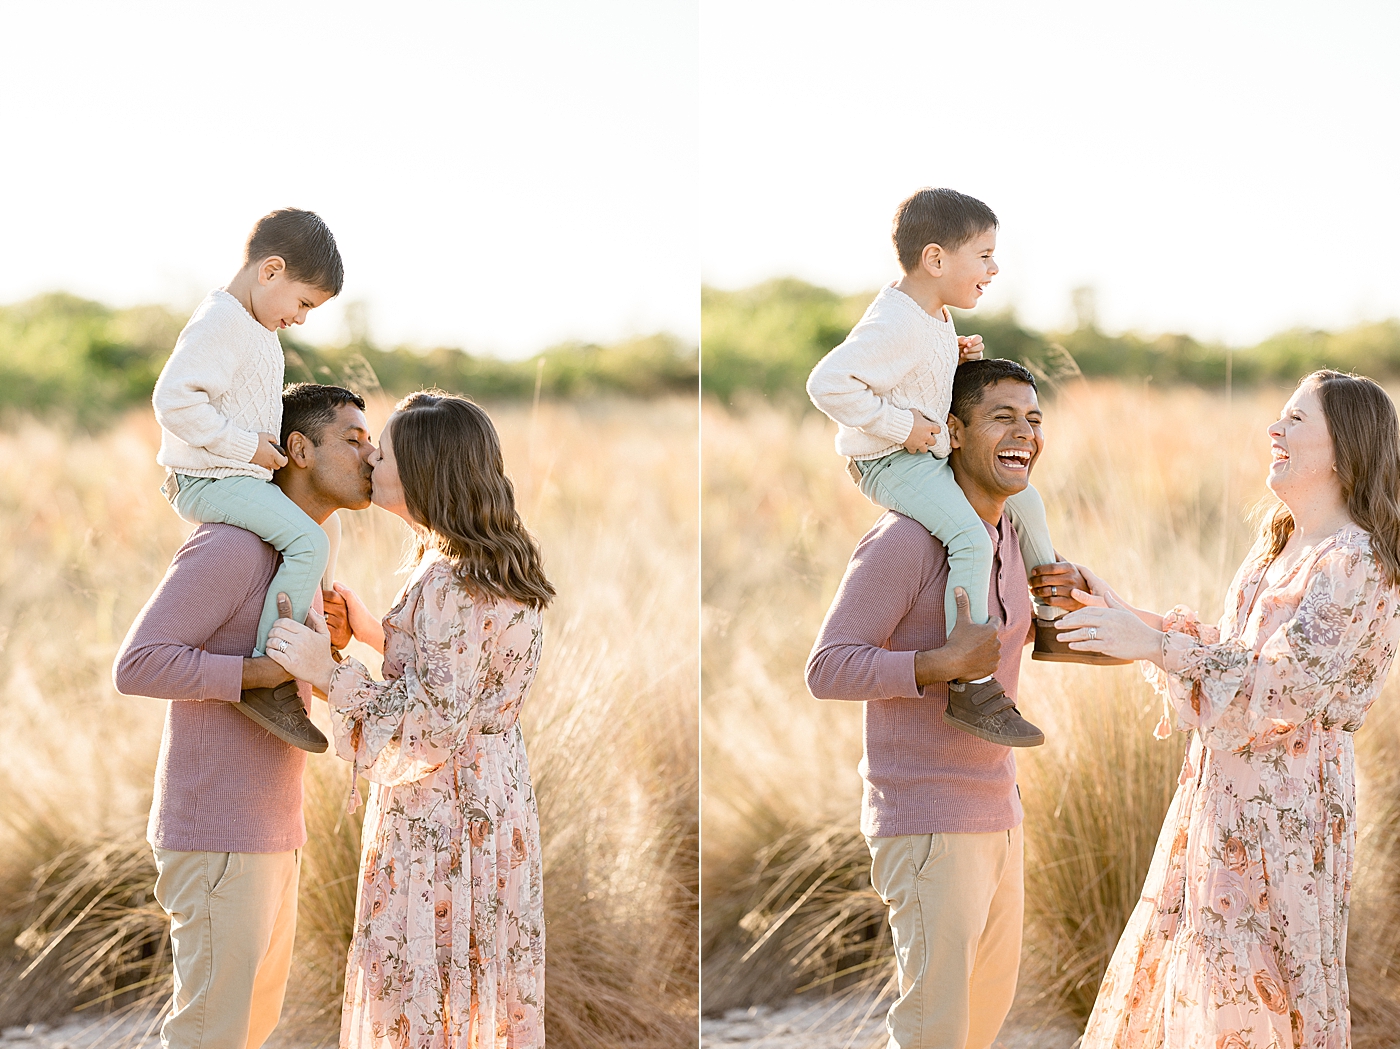 Family photos at Cypress Point Park at sunset. Photos by Brittany Elise Photography.